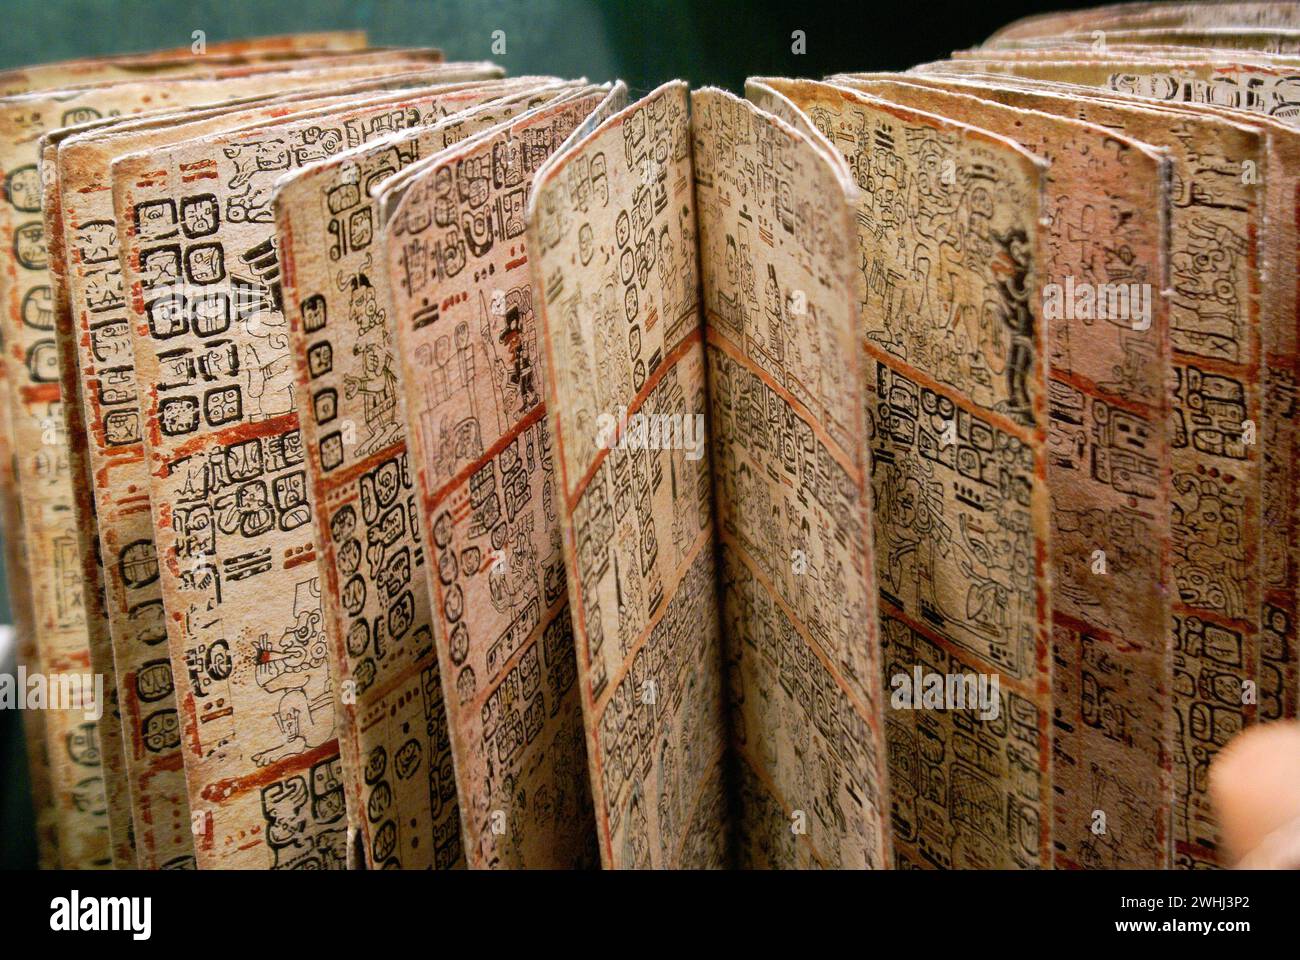 Codex Grolier. Maya Culture. National Museum of Anthropology. State of Mexico D.F. Mexico. Stock Photo